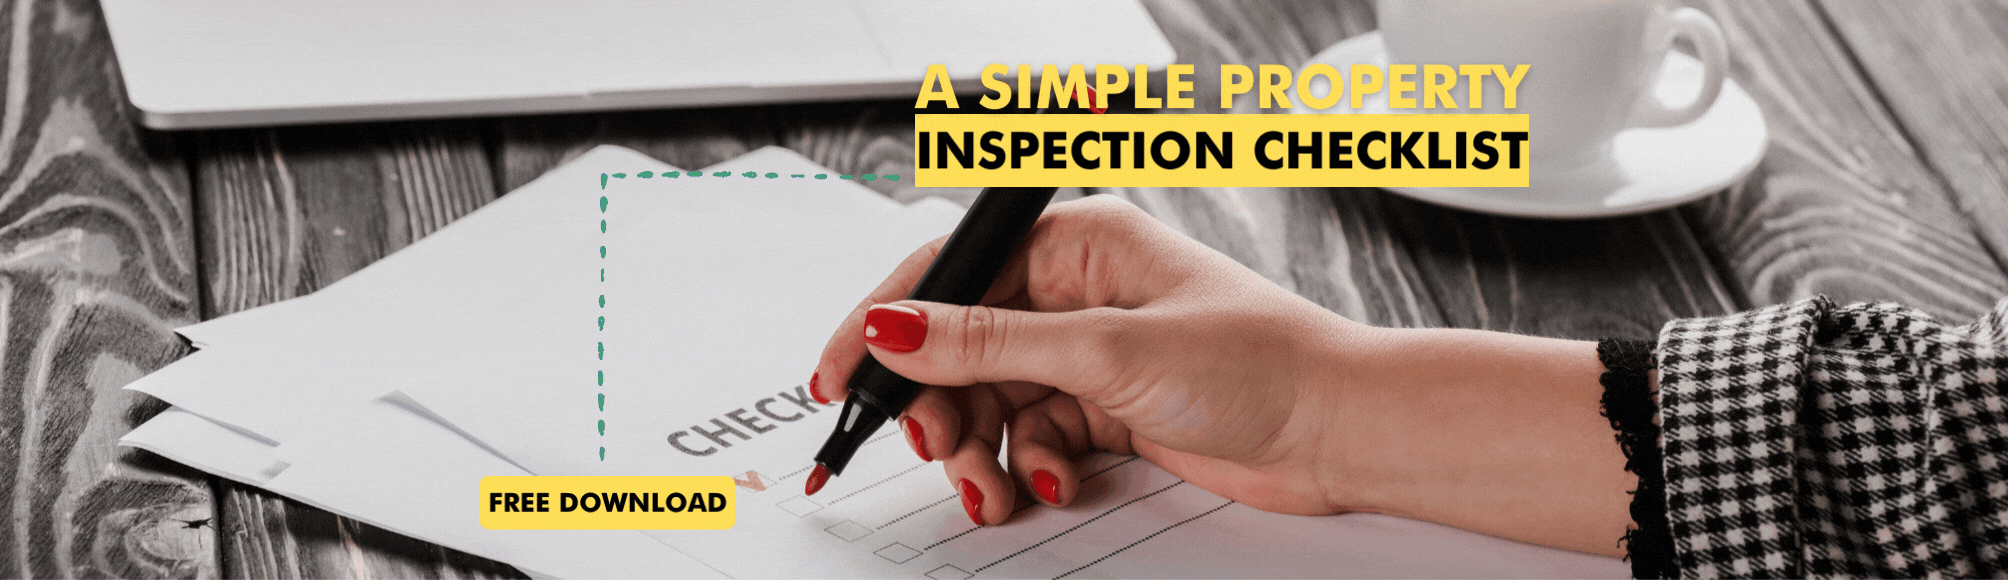 A Simple Property Inspection Checklist I’ve Used for Years [FREE DOWNLOAD]